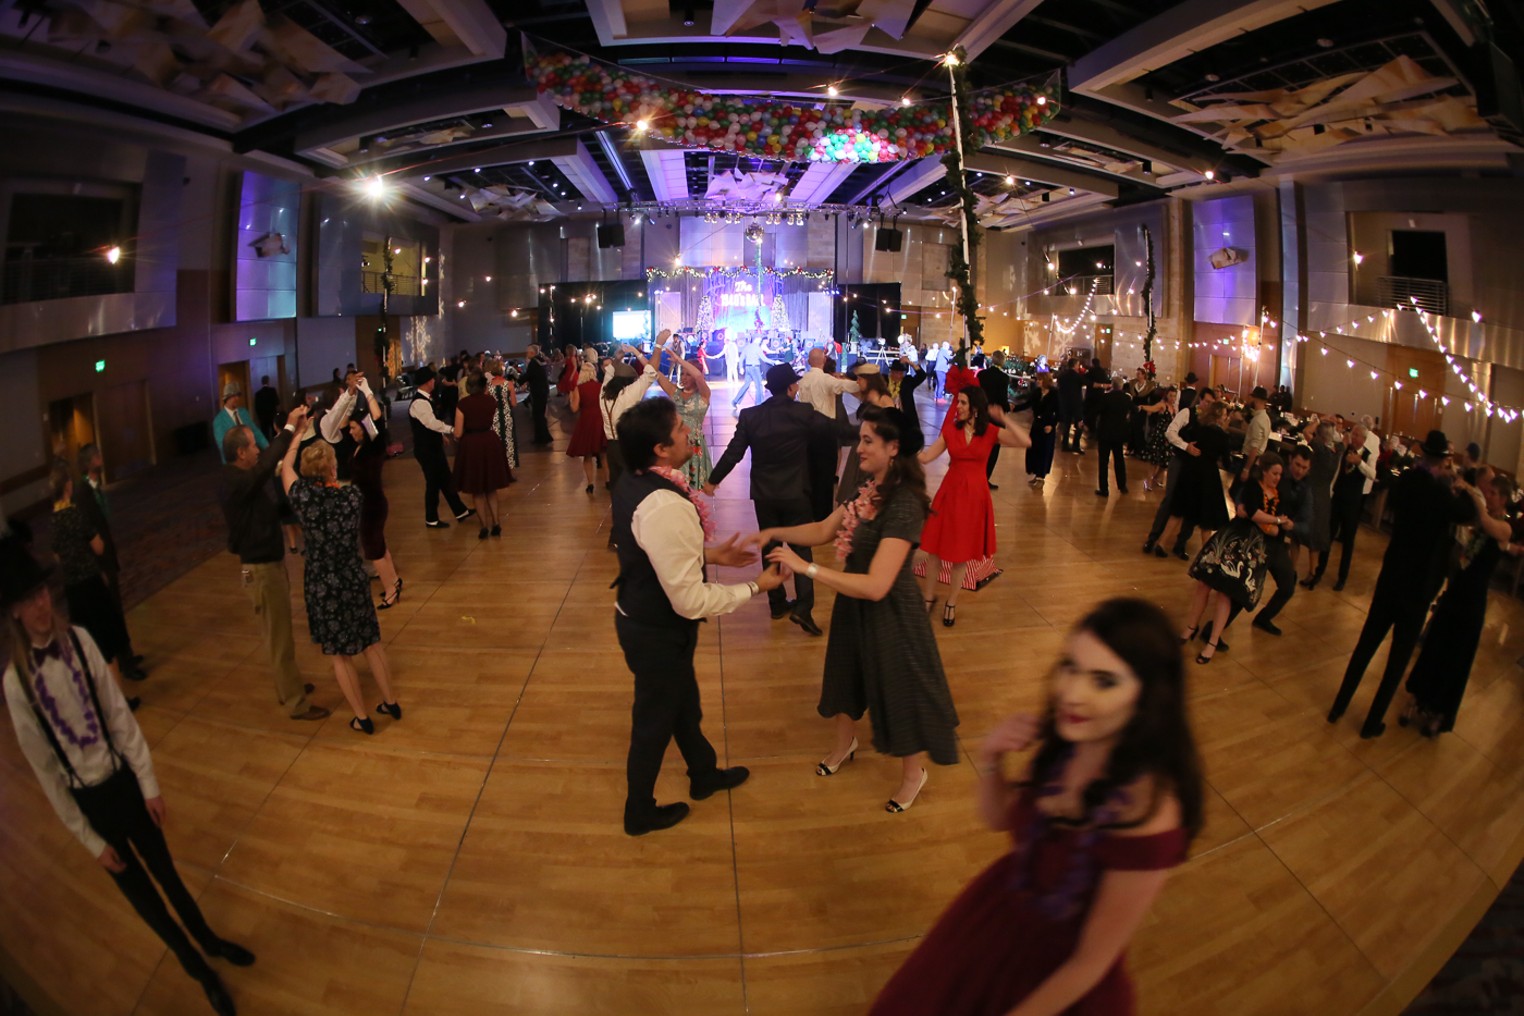 Getting Into the Swing of Things at the 1940s White Christmas Ball